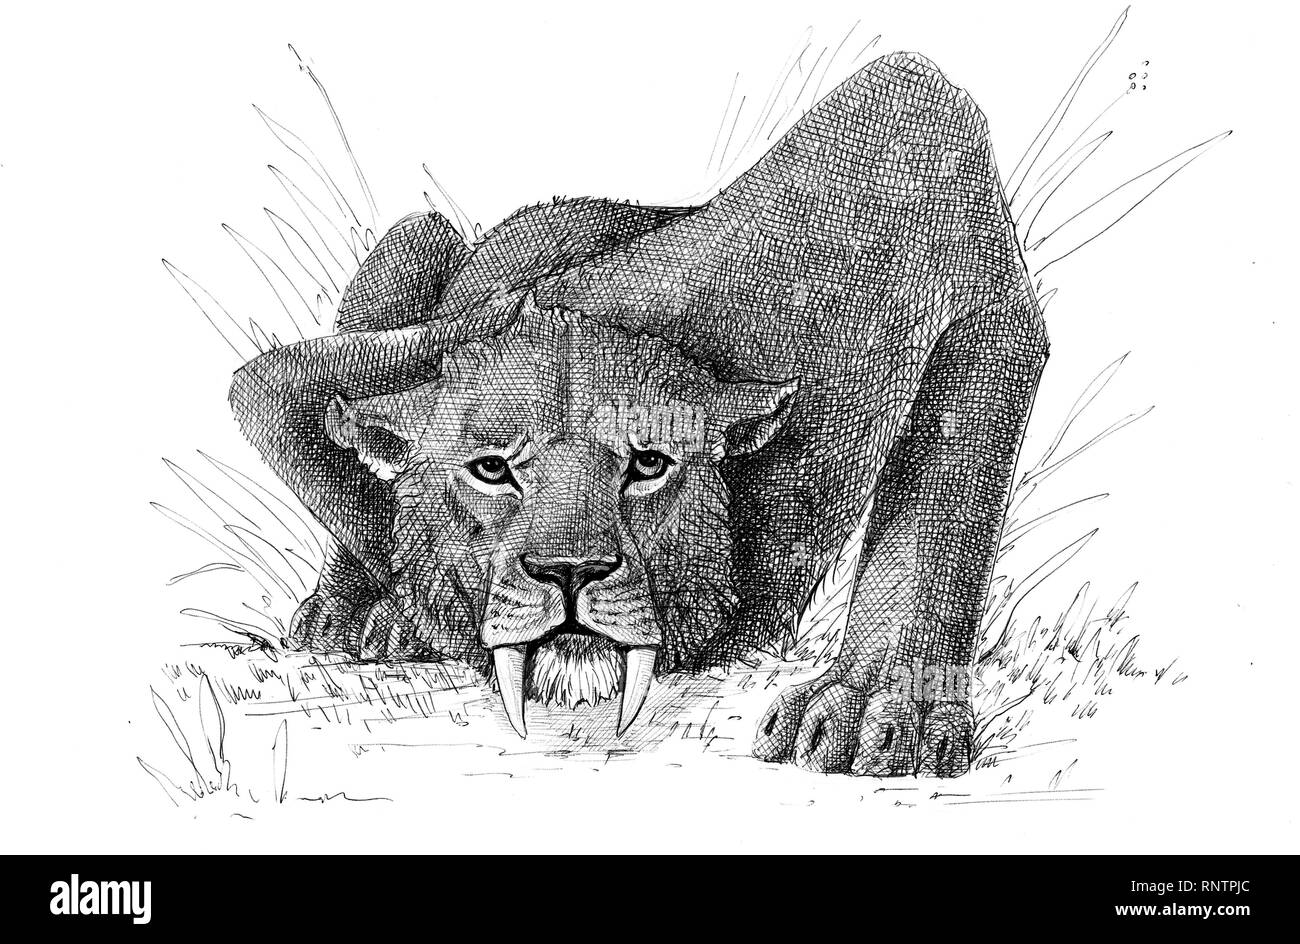 Saber tooth cat on the hunt. Animals drawing. Saber-toothed cat attack. Smilodon from ice age Stock Photo